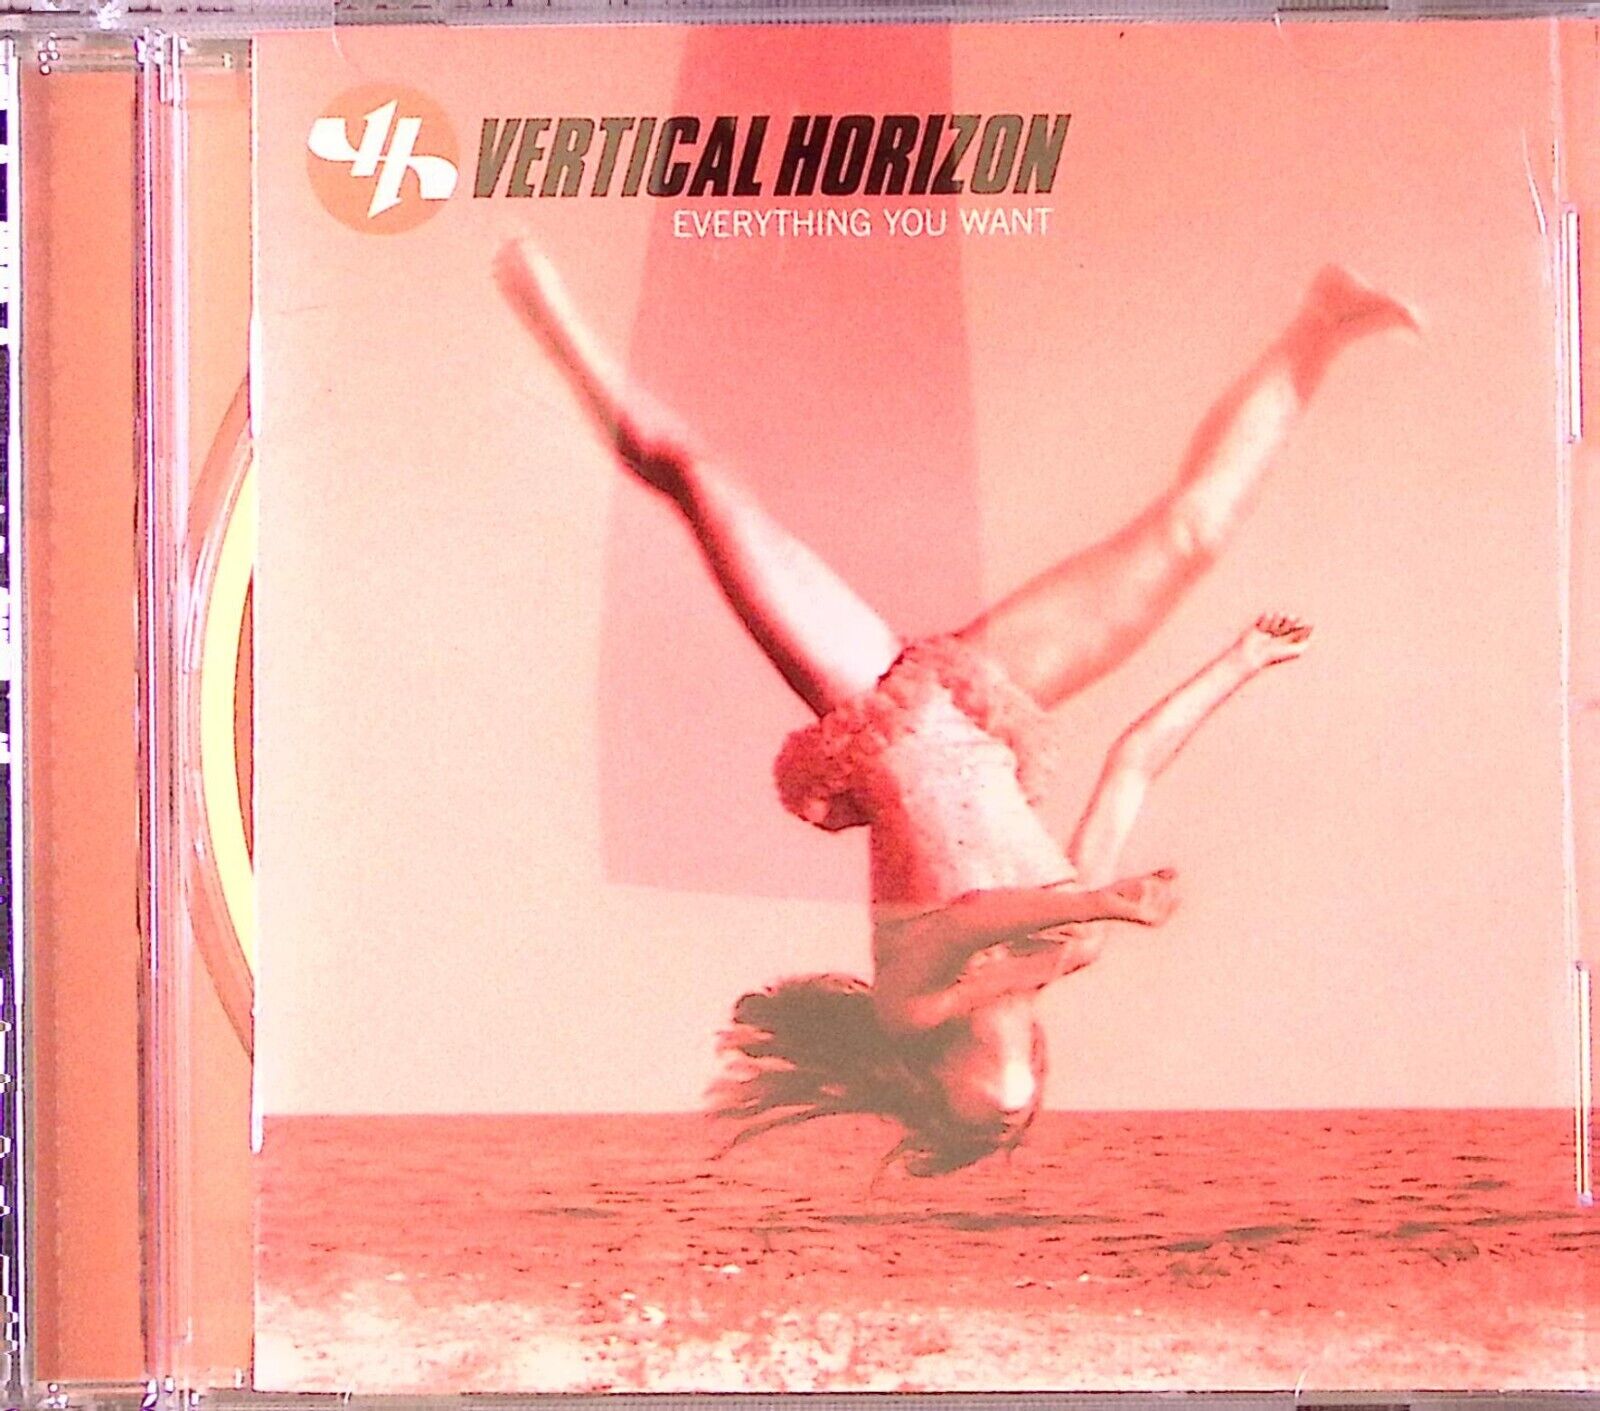 VERTICAL HORIZON  EVERYTHING YOU WANT  RCA RECORDS  CD 2564